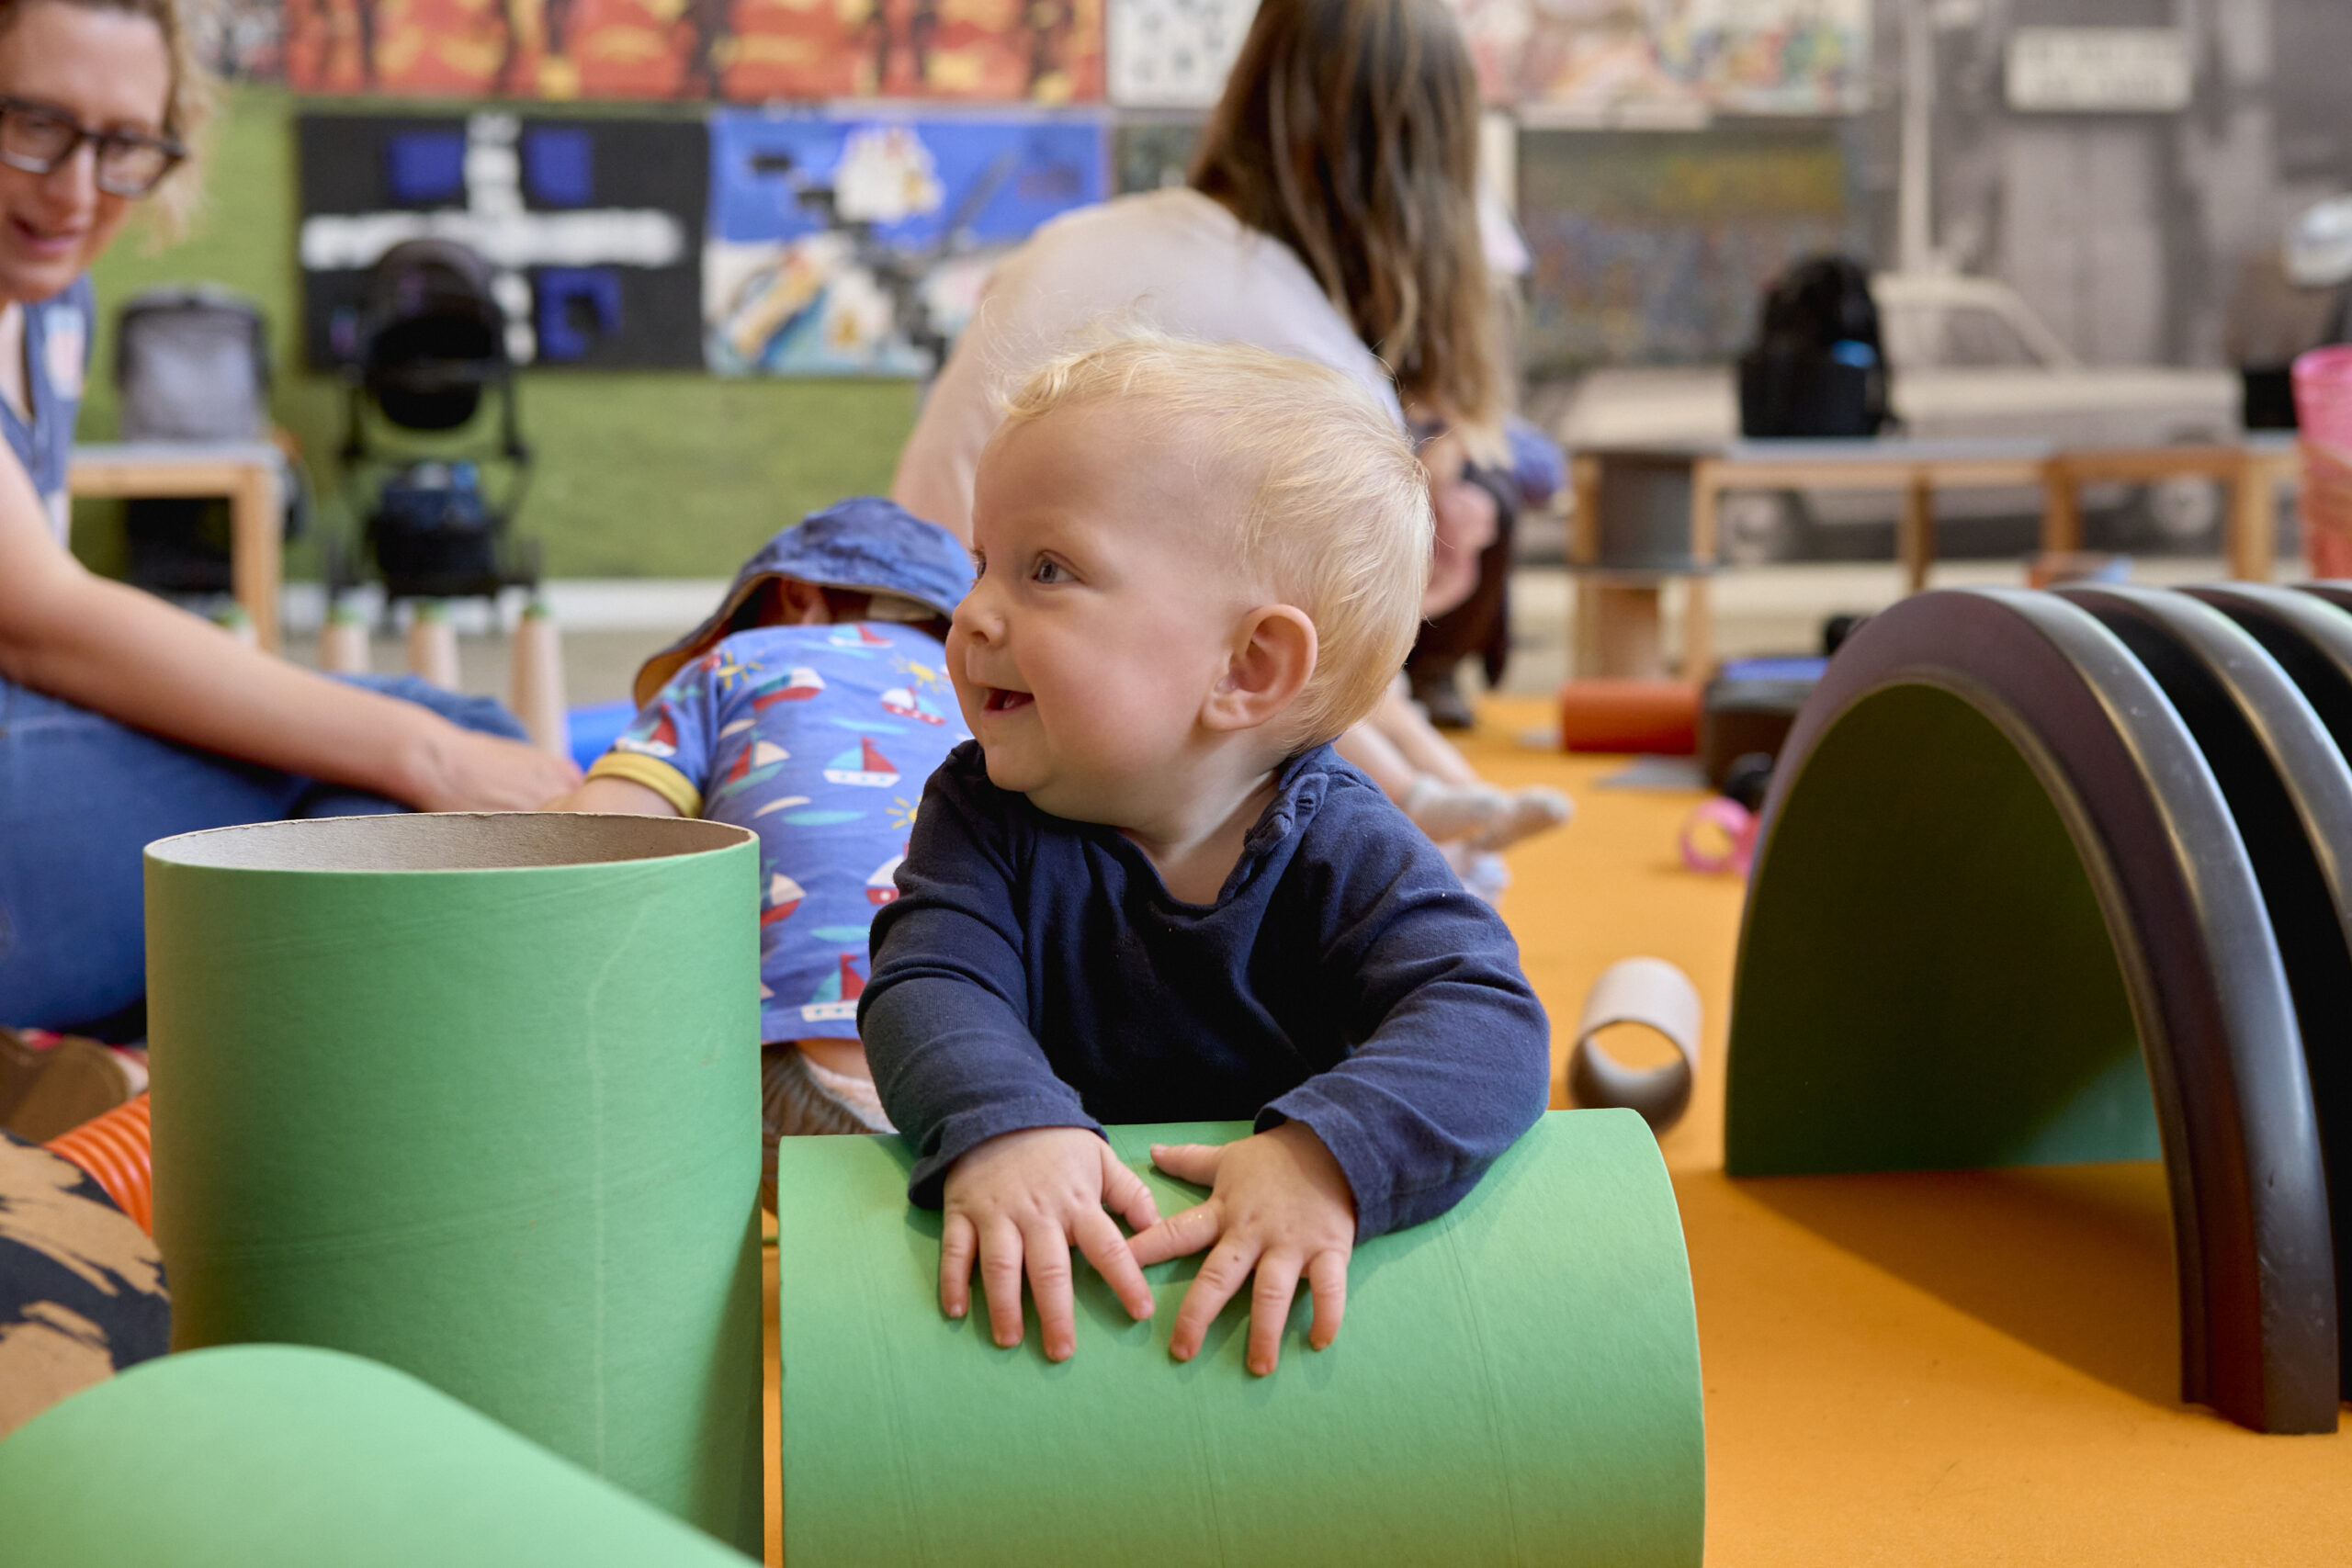 A baby in a blue long sleeved outfit leans on a large green tube during a play session at The Whitworth. Families can be seen playing with other play equipment in the background.